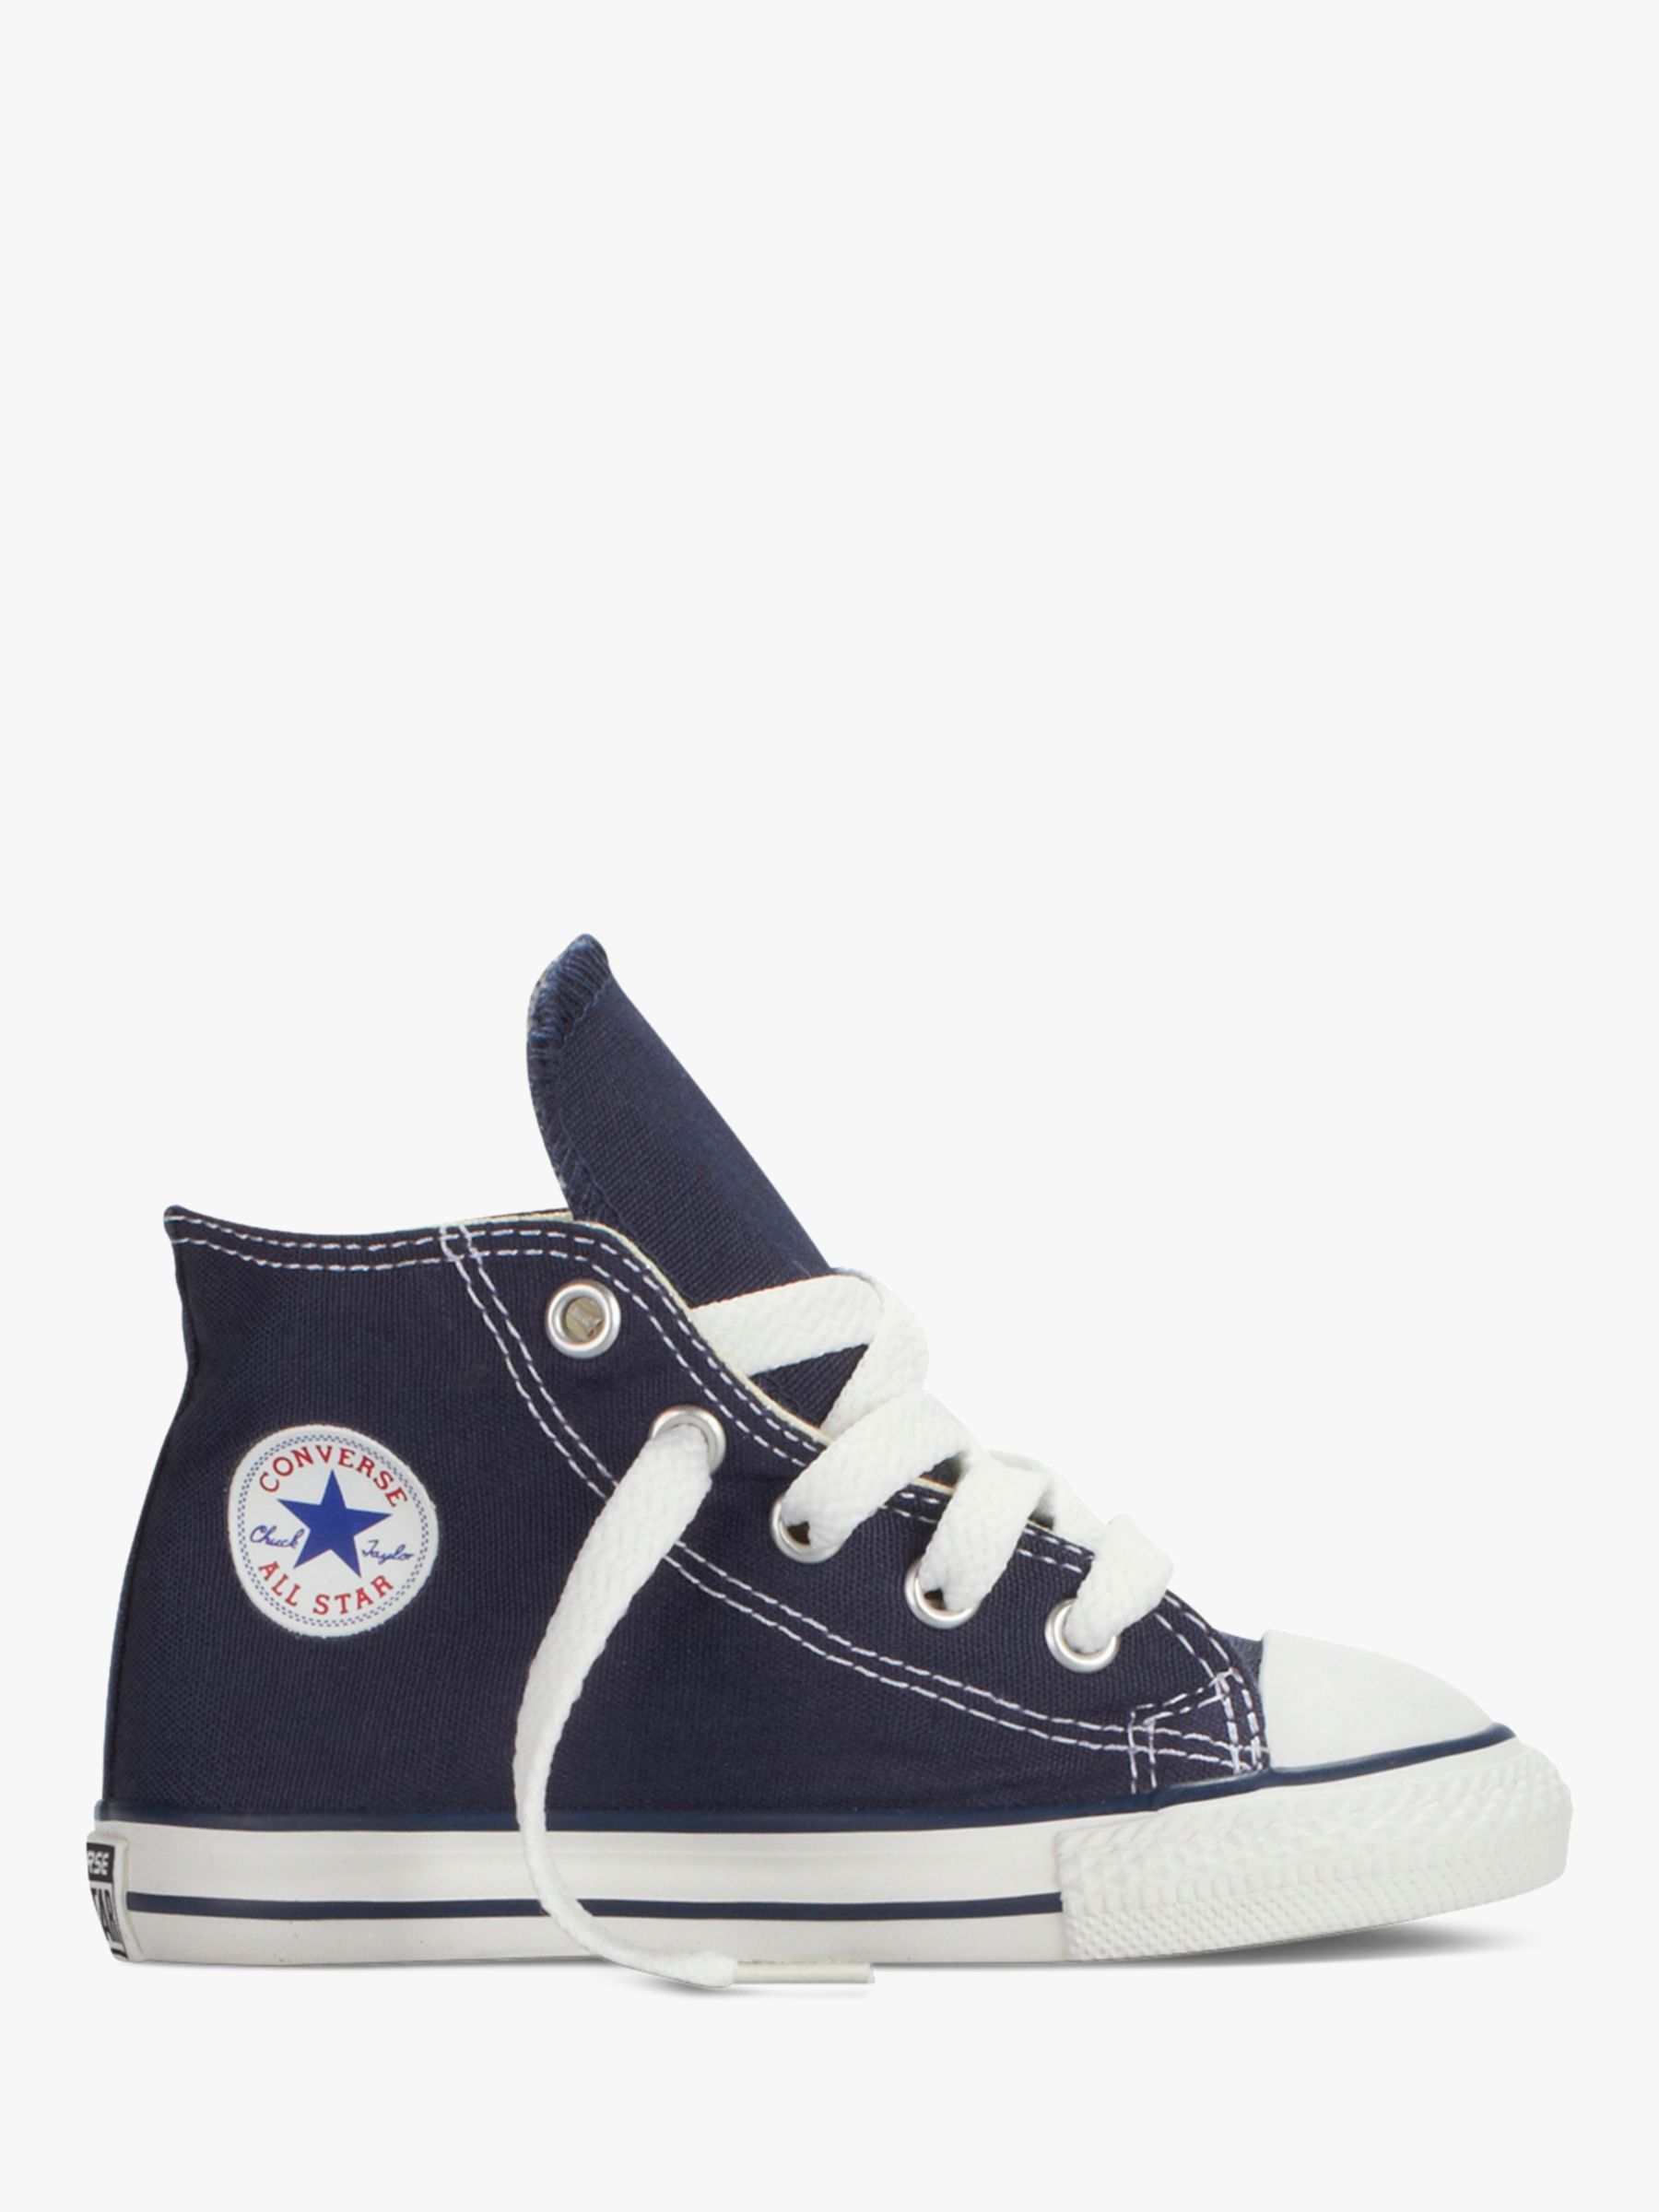 All Star Core-Hi Trainers, Navy, Size 4 Adult